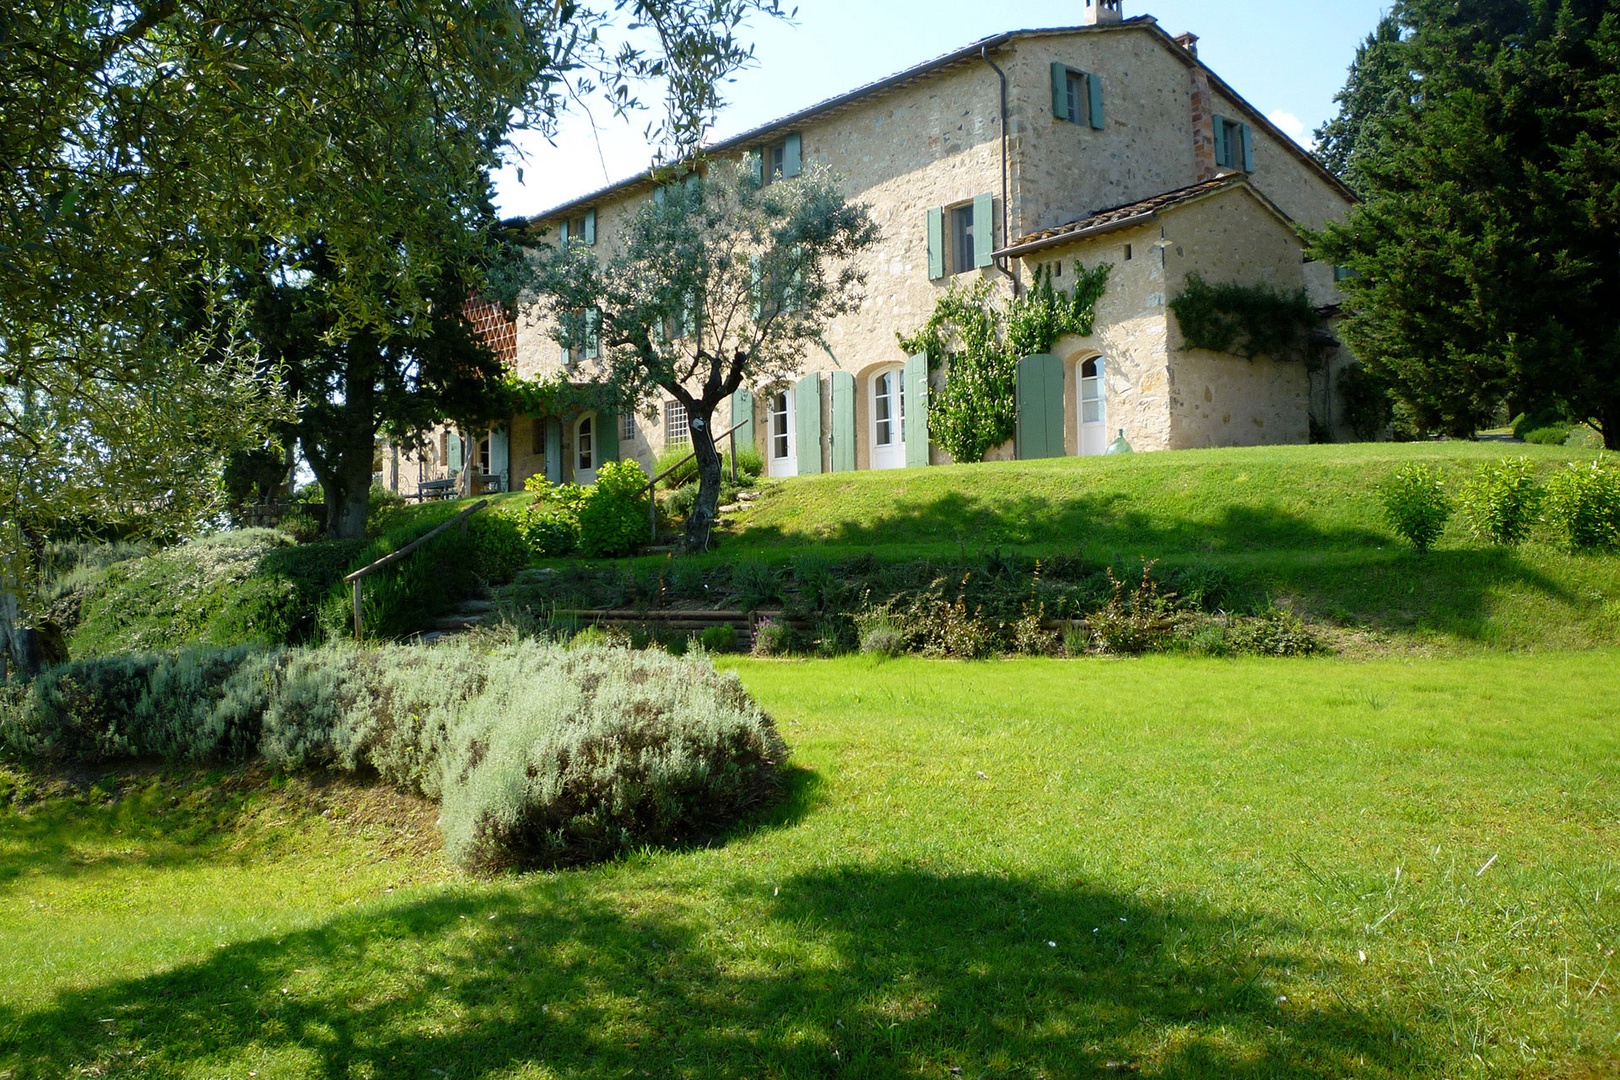 Enjoy an authentic Tuscan experience in this beautifully restored 18th century farmhouse.